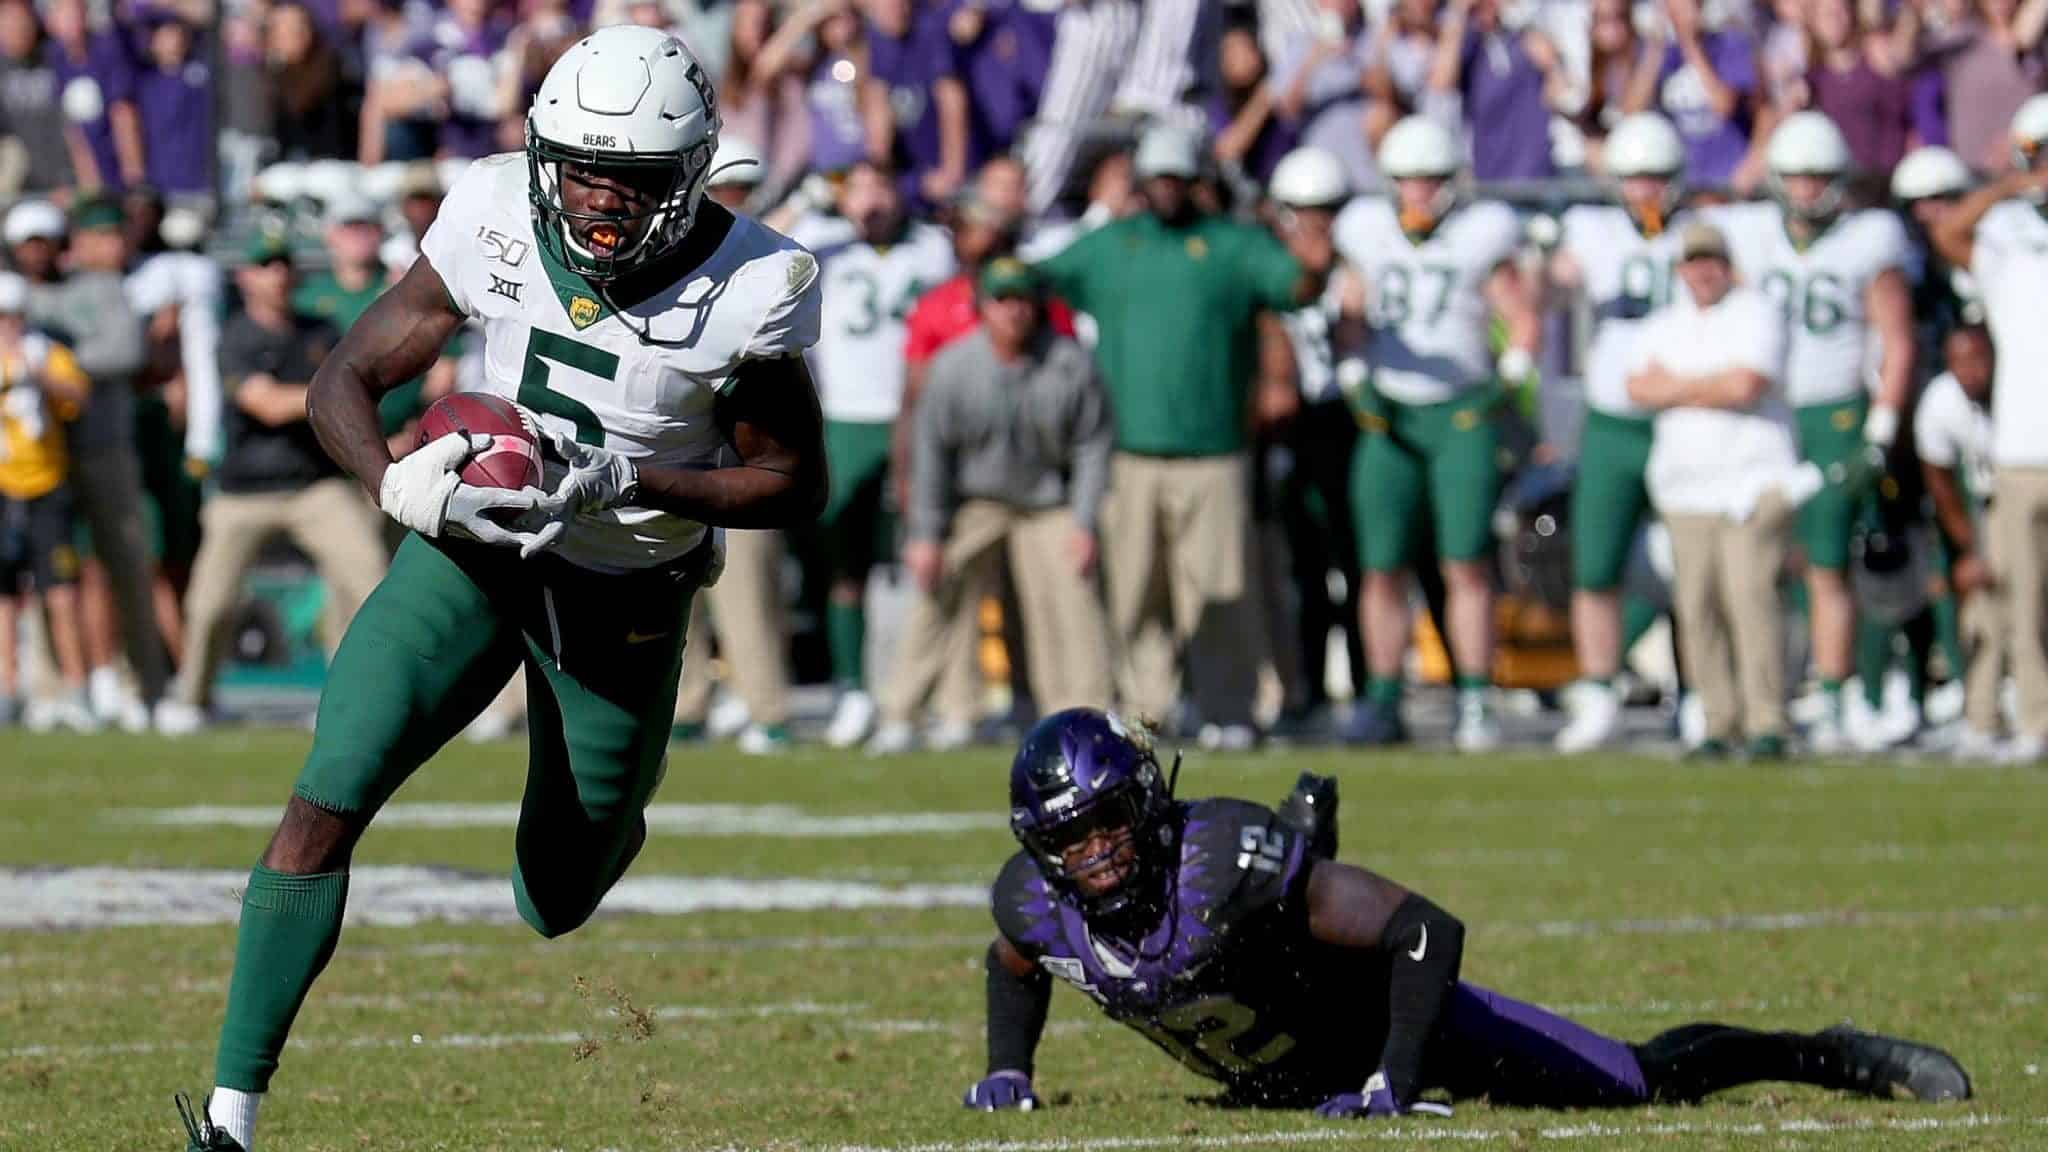 FORT WORTH, TEXAS - NOVEMBER 09: Denzel Mims #5 of the Baylor Bears scores a touchdown against Jeff Gladney #12 of the TCU Horned Frogs in the second overtime period at Amon G. Carter Stadium on November 09, 2019 in Fort Worth, Texas.